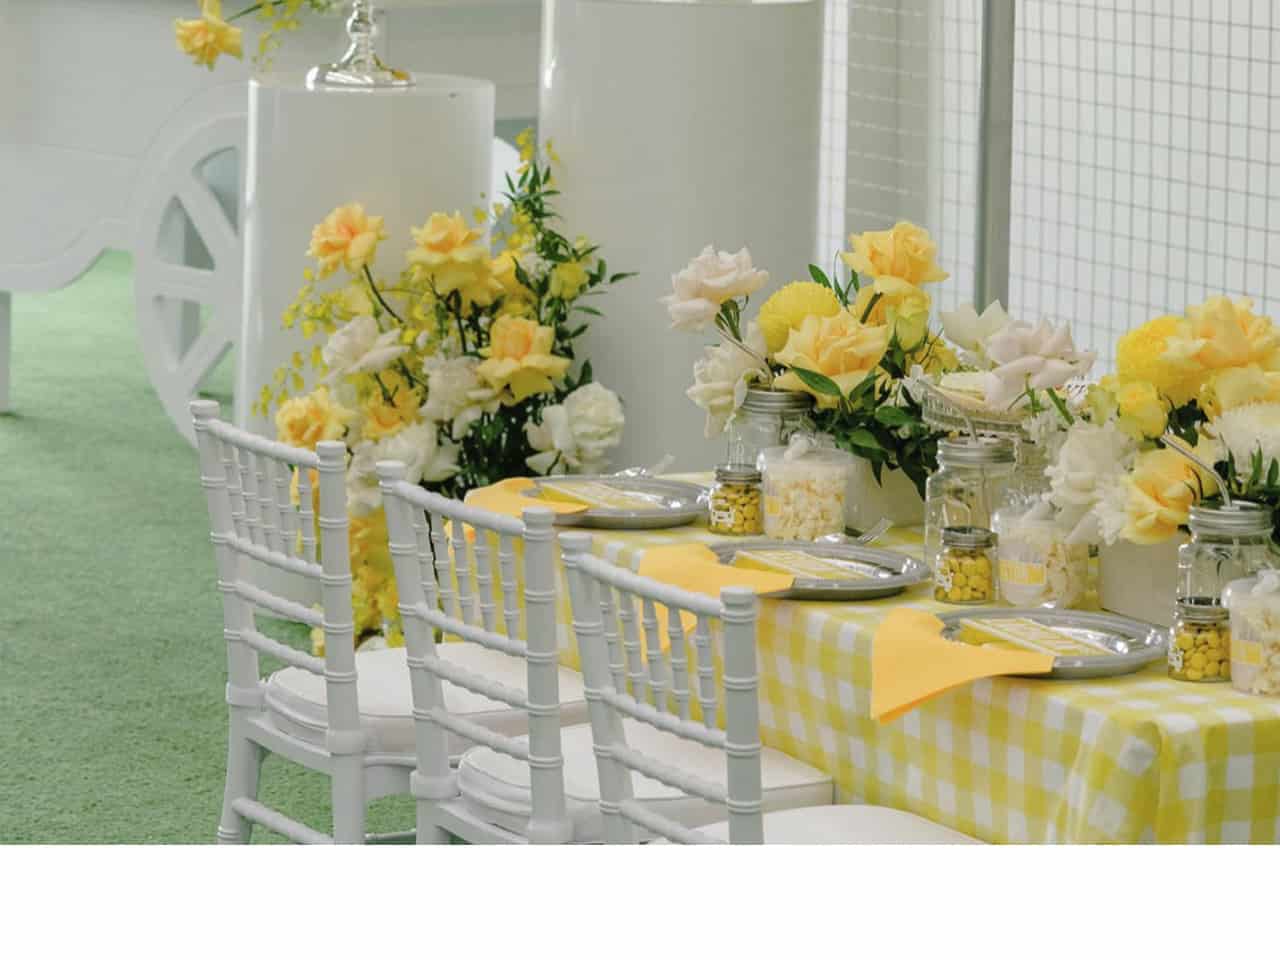 Tables with yellow decorations